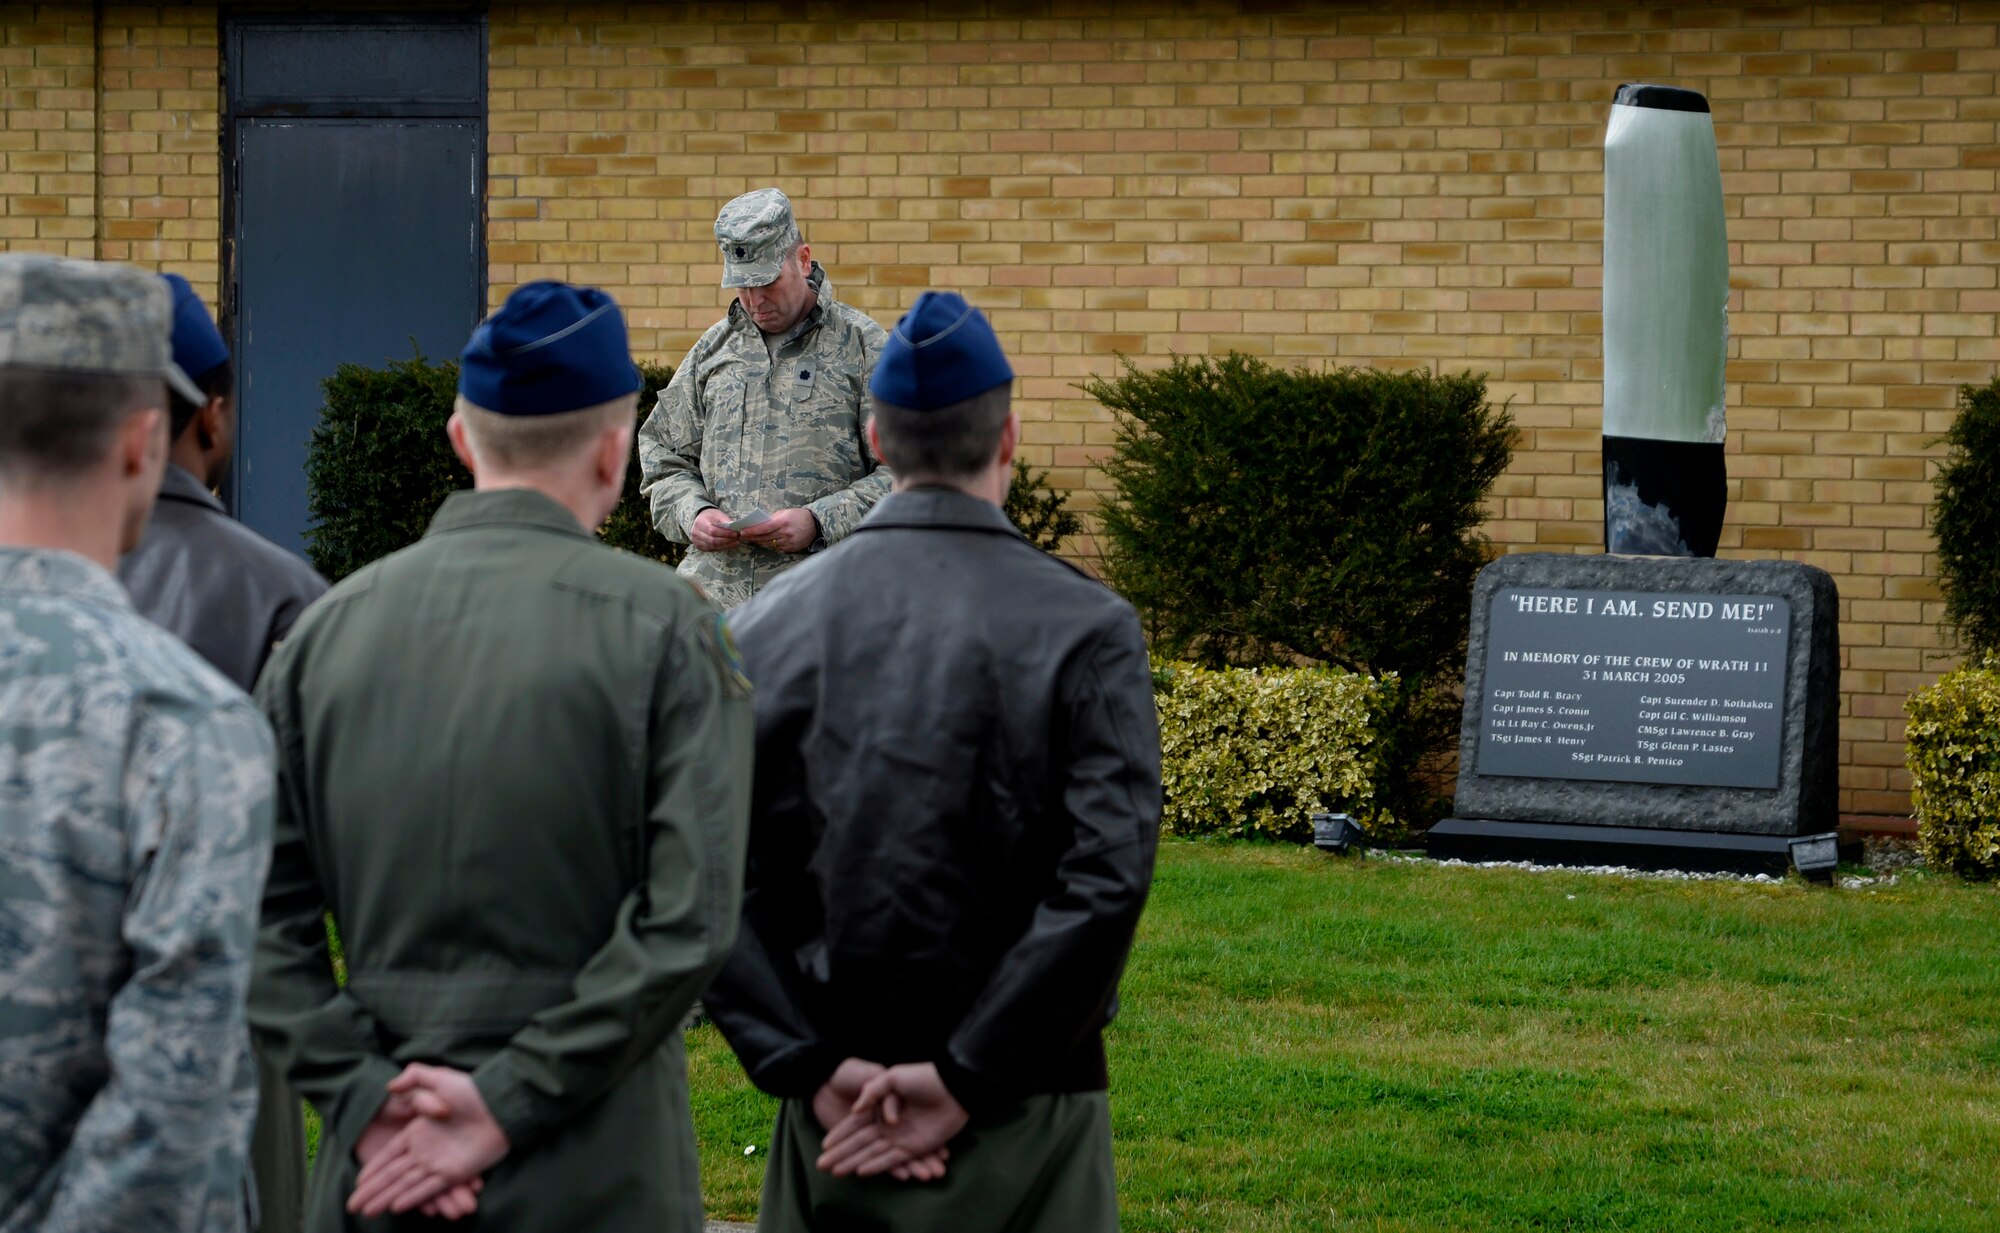 U.S. Air Force Lt. Col. Richard Greszler, 352nd Special Operations Support Squadron commander, speaks about the Airmen he once knew during a remembrance ceremony March 31, 2015, on RAF Mildenhall, England. The ceremony was held in honor of the 10th anniversary of the nine Airmen who died when WRATH-11, an MC-130H Combat Talon II assigned to the 7th SOS, crashed in Albania in 2005. (U.S. Air Force photo by Senior Airman Victoria H. Taylor)